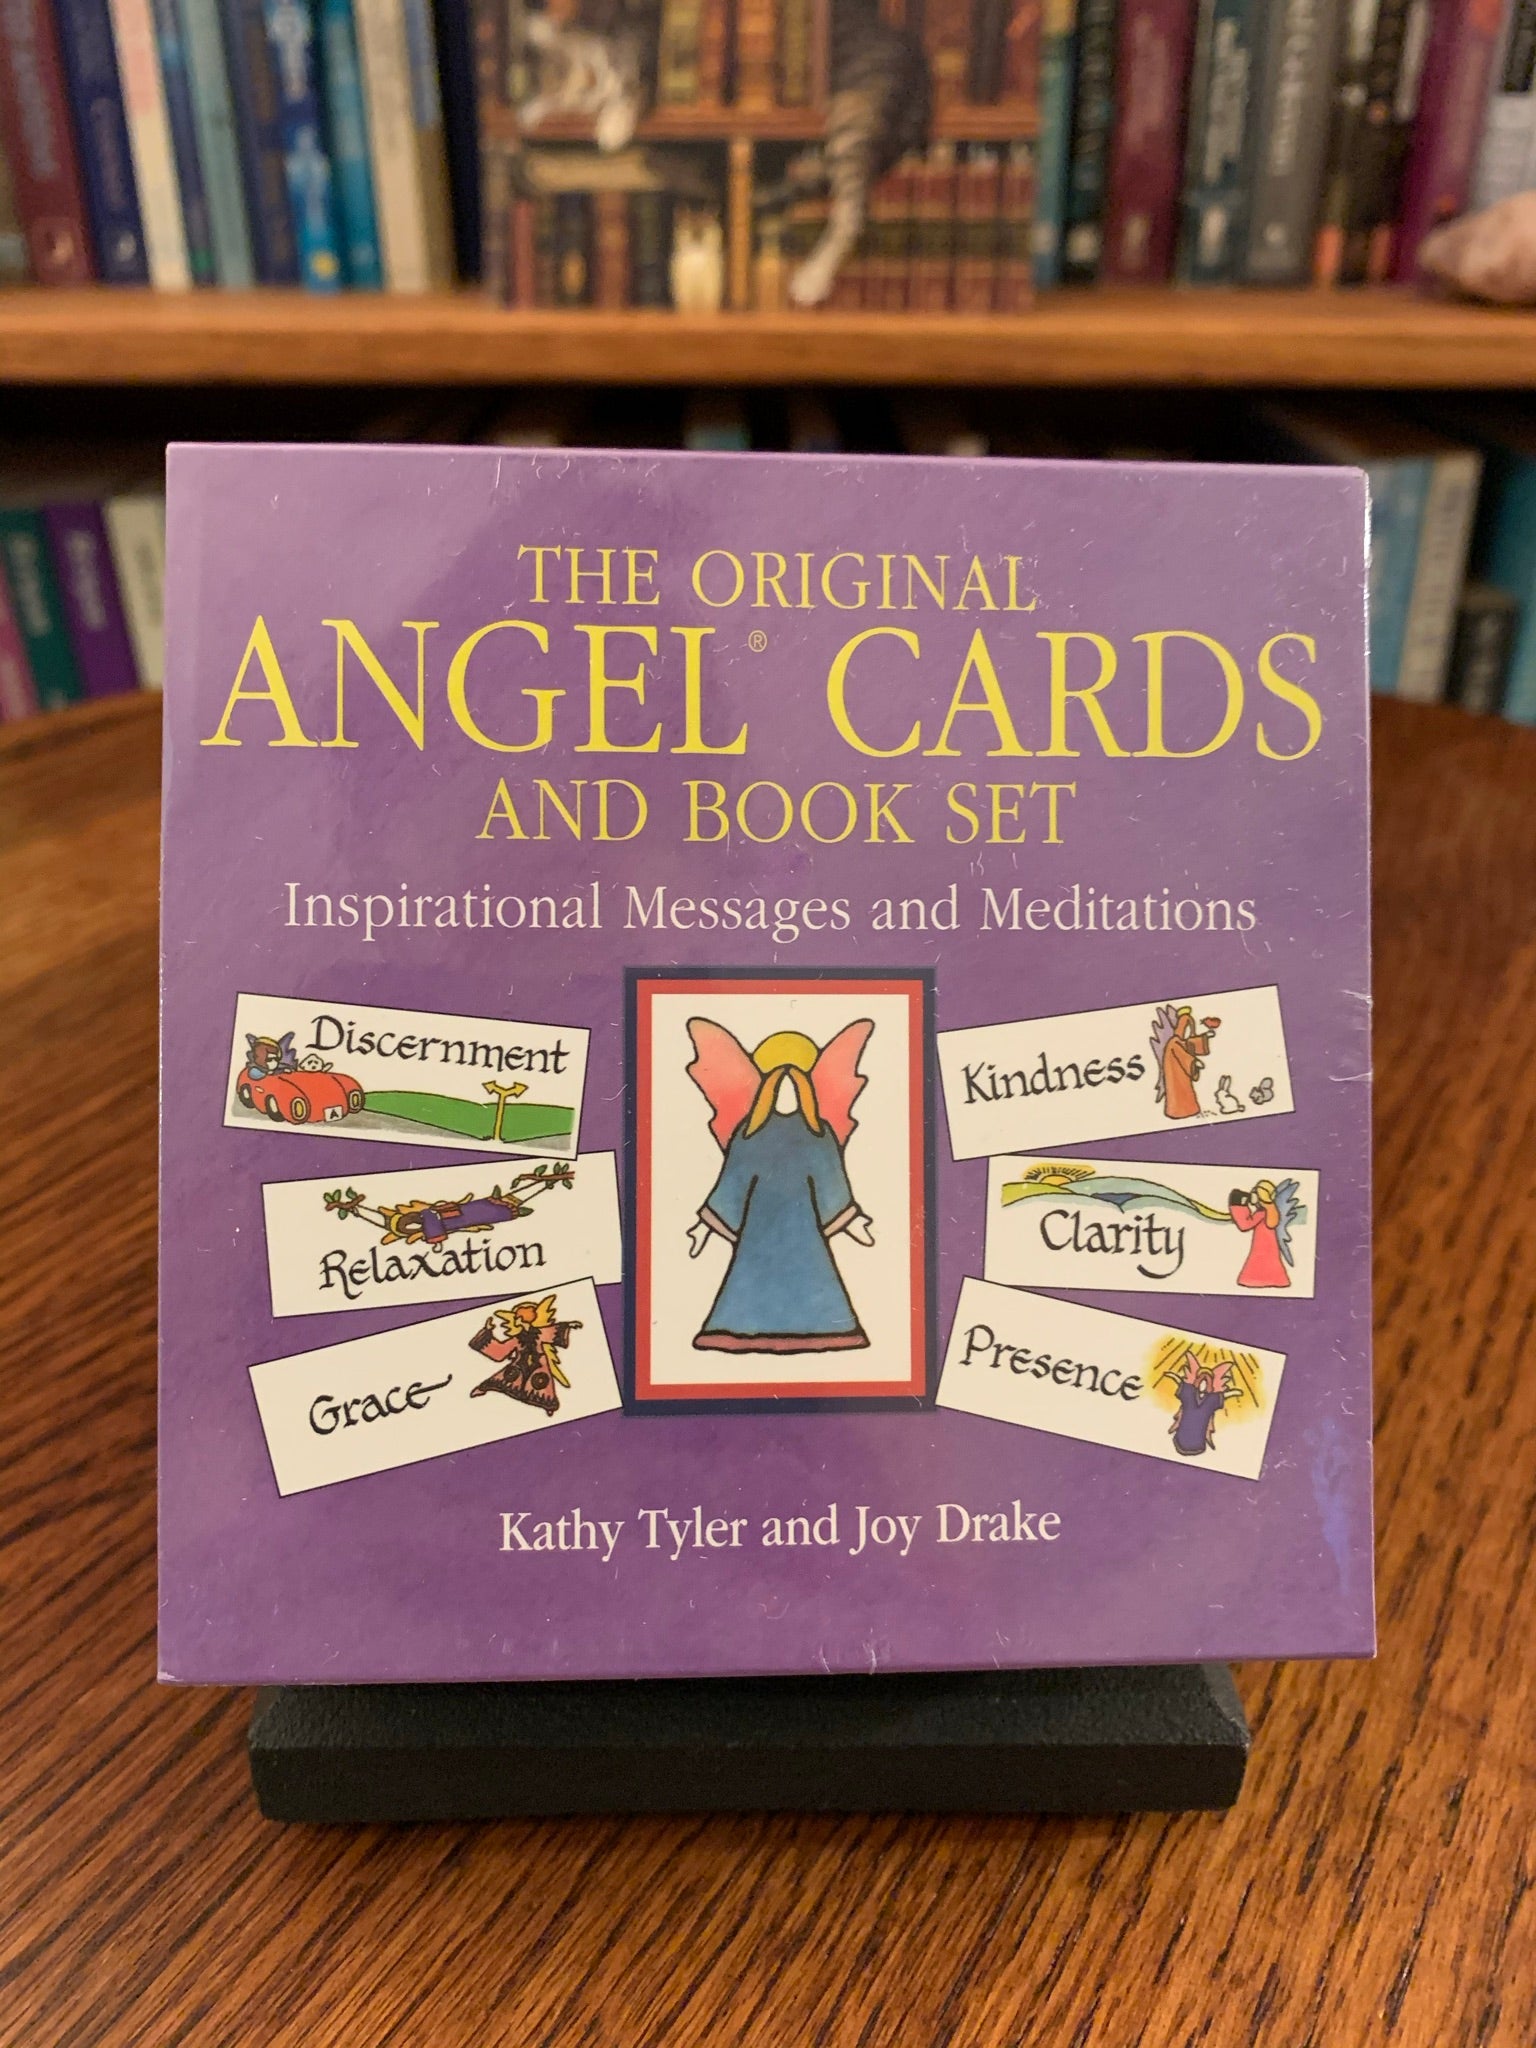 This is an expanded edition of the Original Angels Cards.  The set includes 20 new cards, for a total of 72 cards in the set, 20 bonus stickers related to the new cards, a small carrying case, a guidebook (with meditations, visualizations and journals to use as you work with the cards), and a "flip-flop" box for storage. Cost is $18.95. The cards in the set are very small compared to normal oracle cards and have one word and illustration on each. Photo shows the front of the deck box.